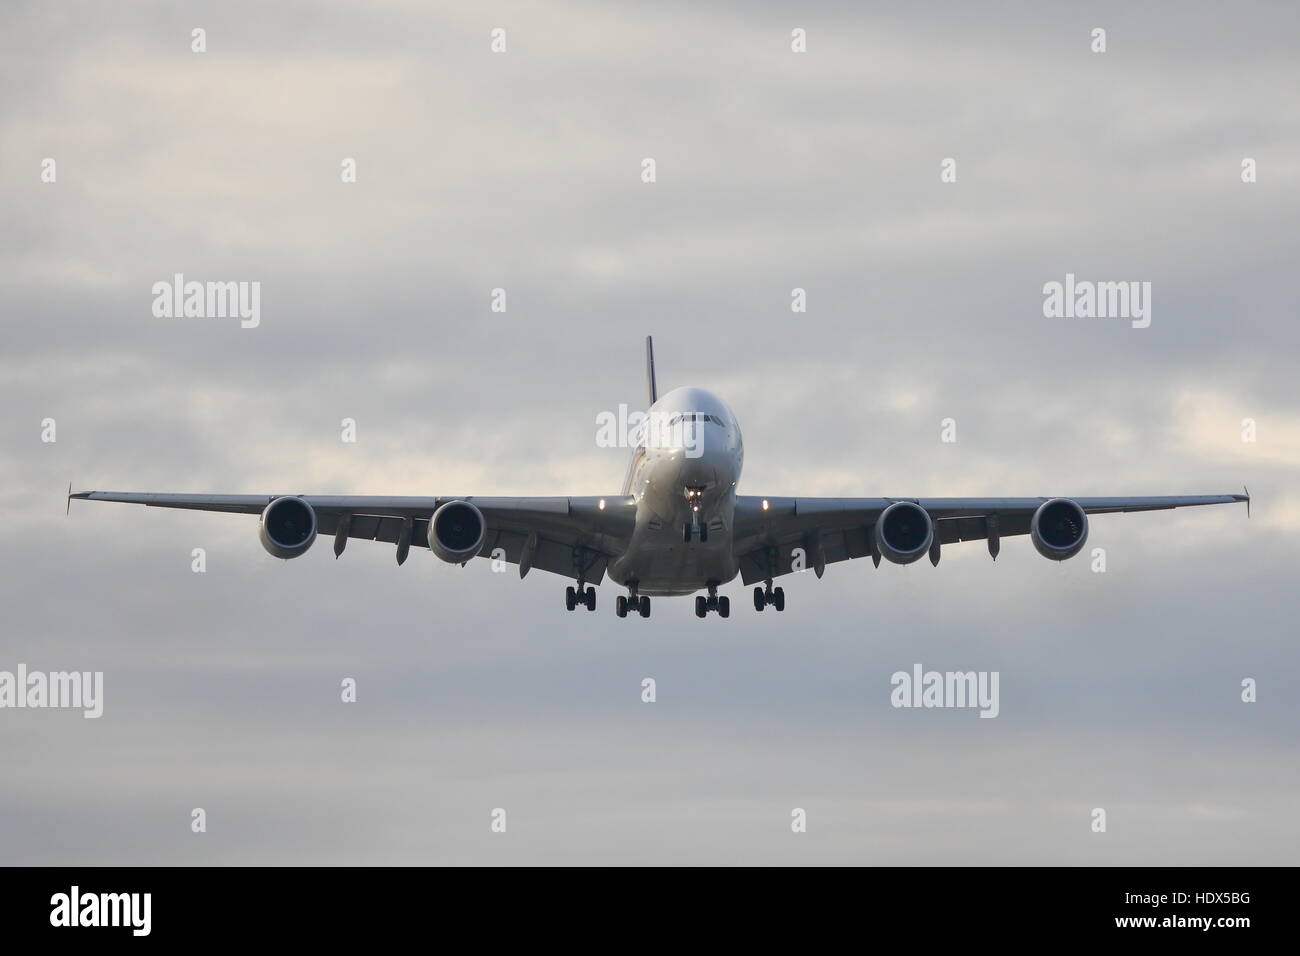 Singapore Airlines Airbus A380 approaching Heathrow Airport in London, UK Stock Photo